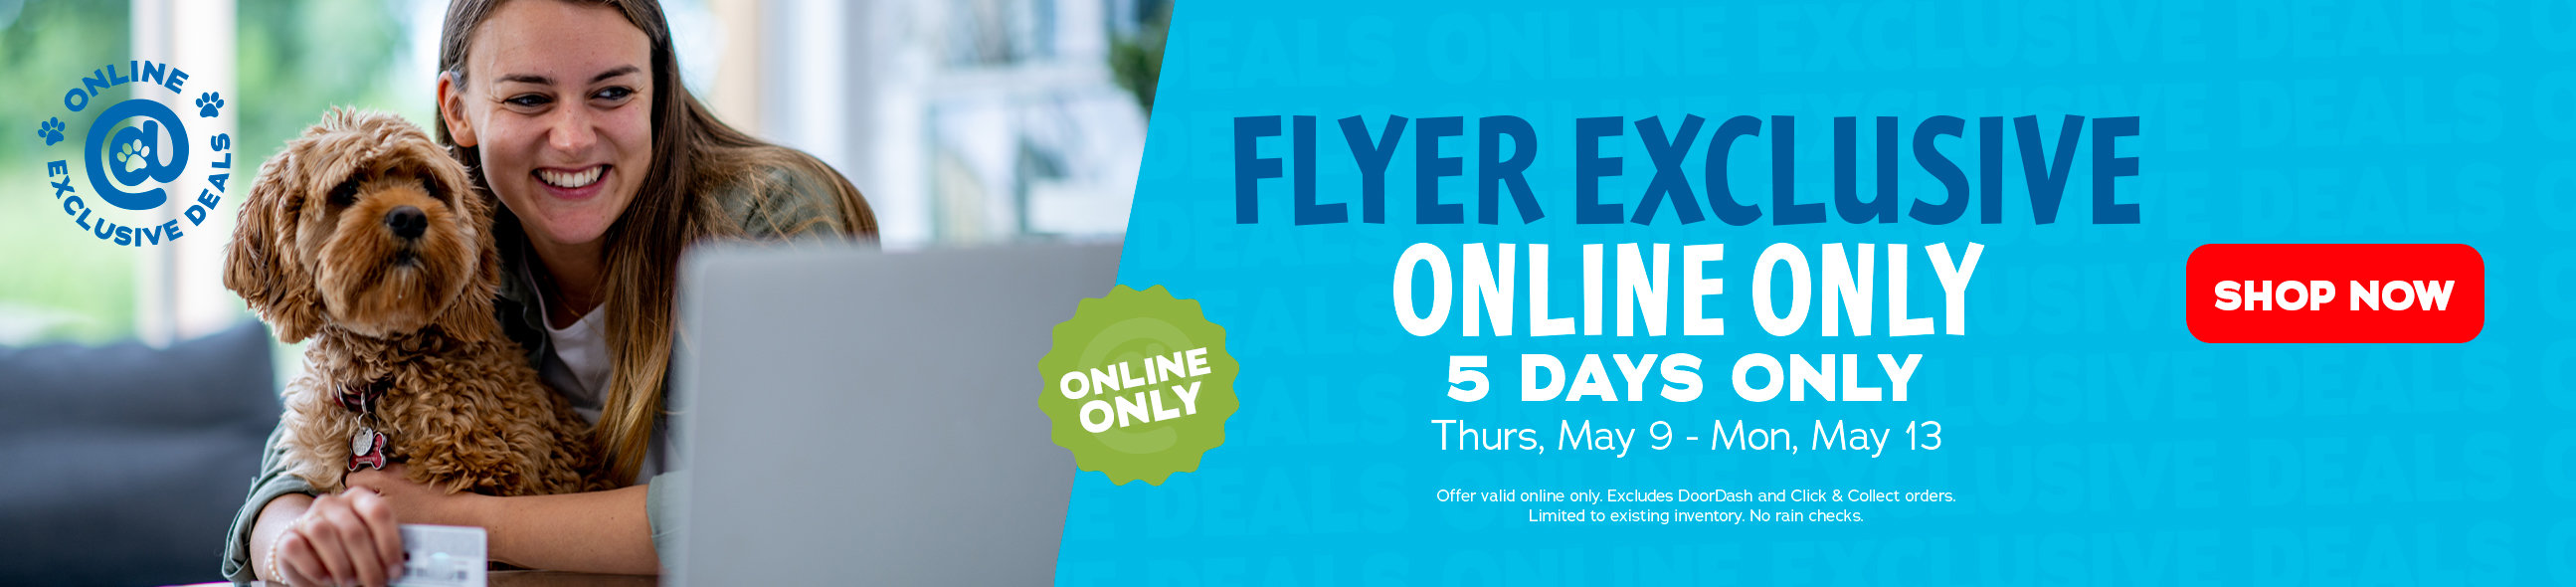 Flyer Exclusive Online Only Flash Sale On Now 5 Days Only